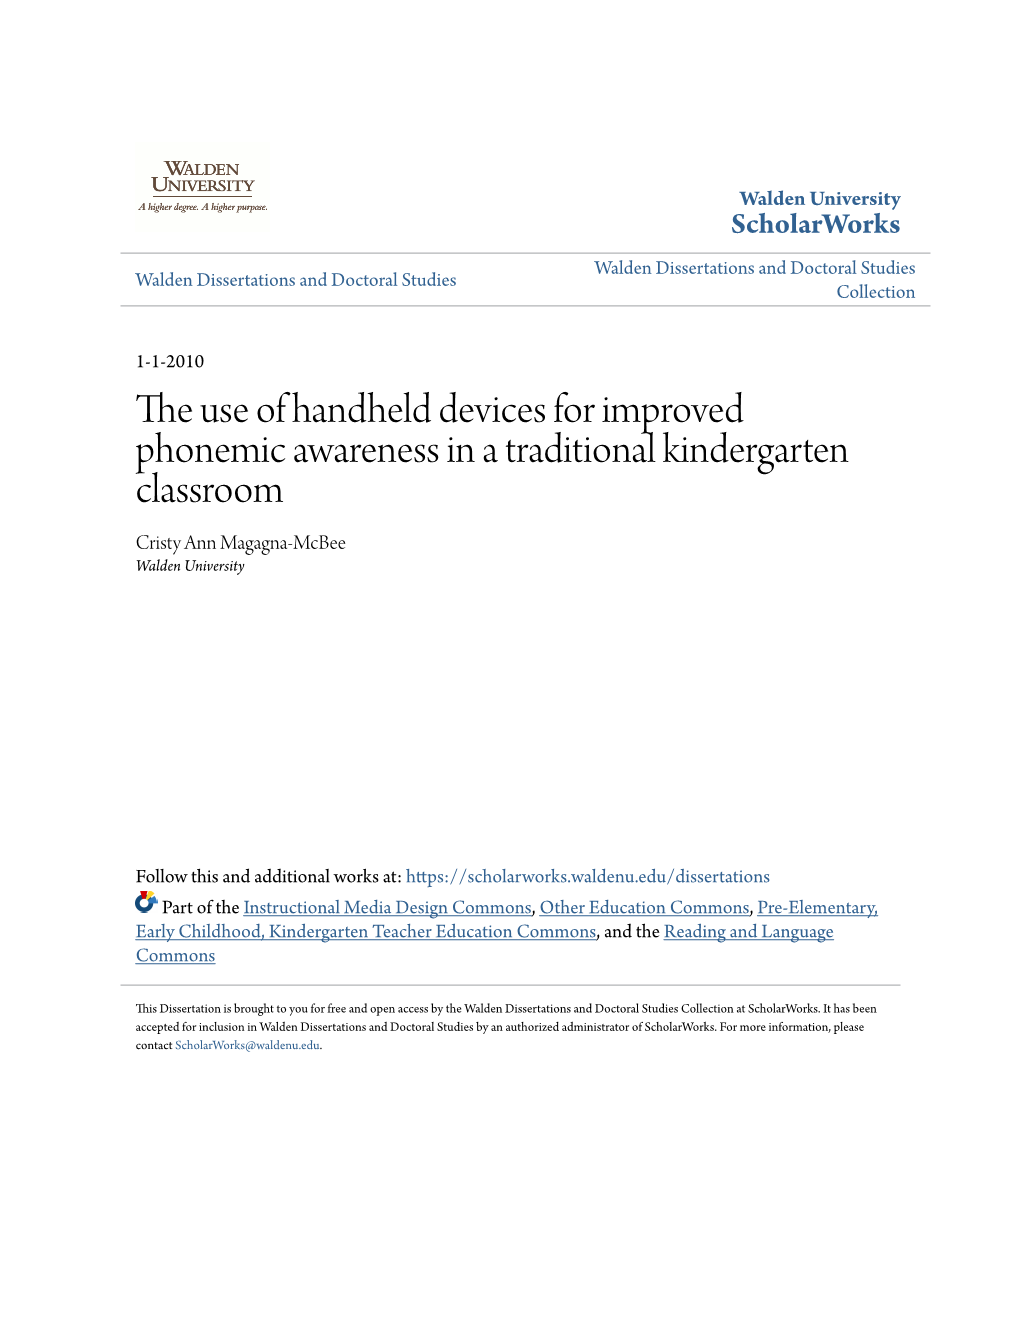 The Use of Handheld Devices for Improved Phonemic Awareness in a Traditional Kindergarten Classroom